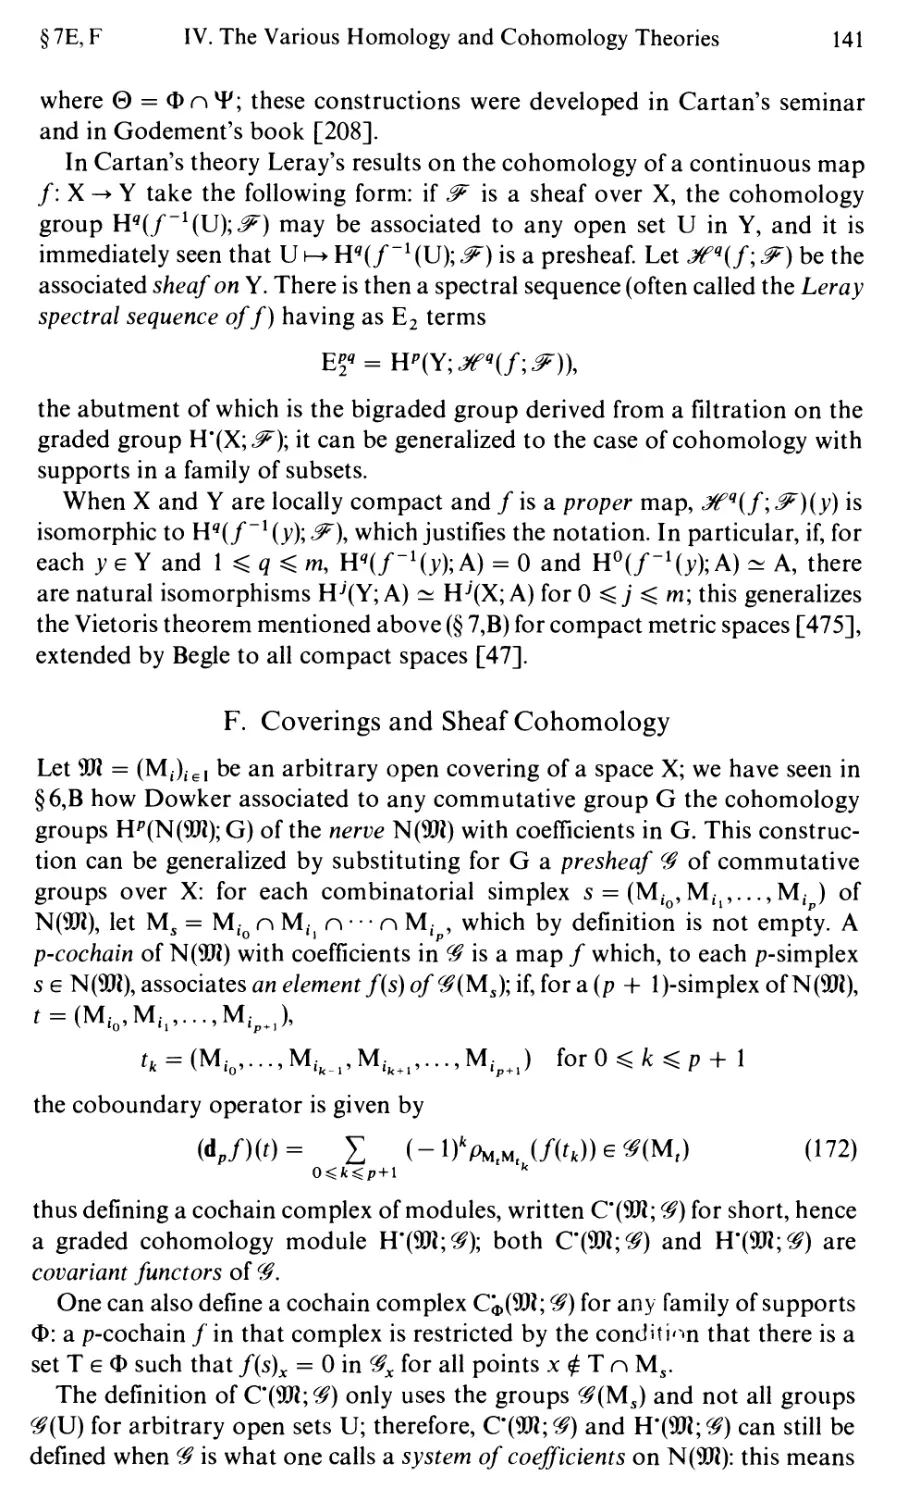 F. Coverings and Sheaf Cohomology